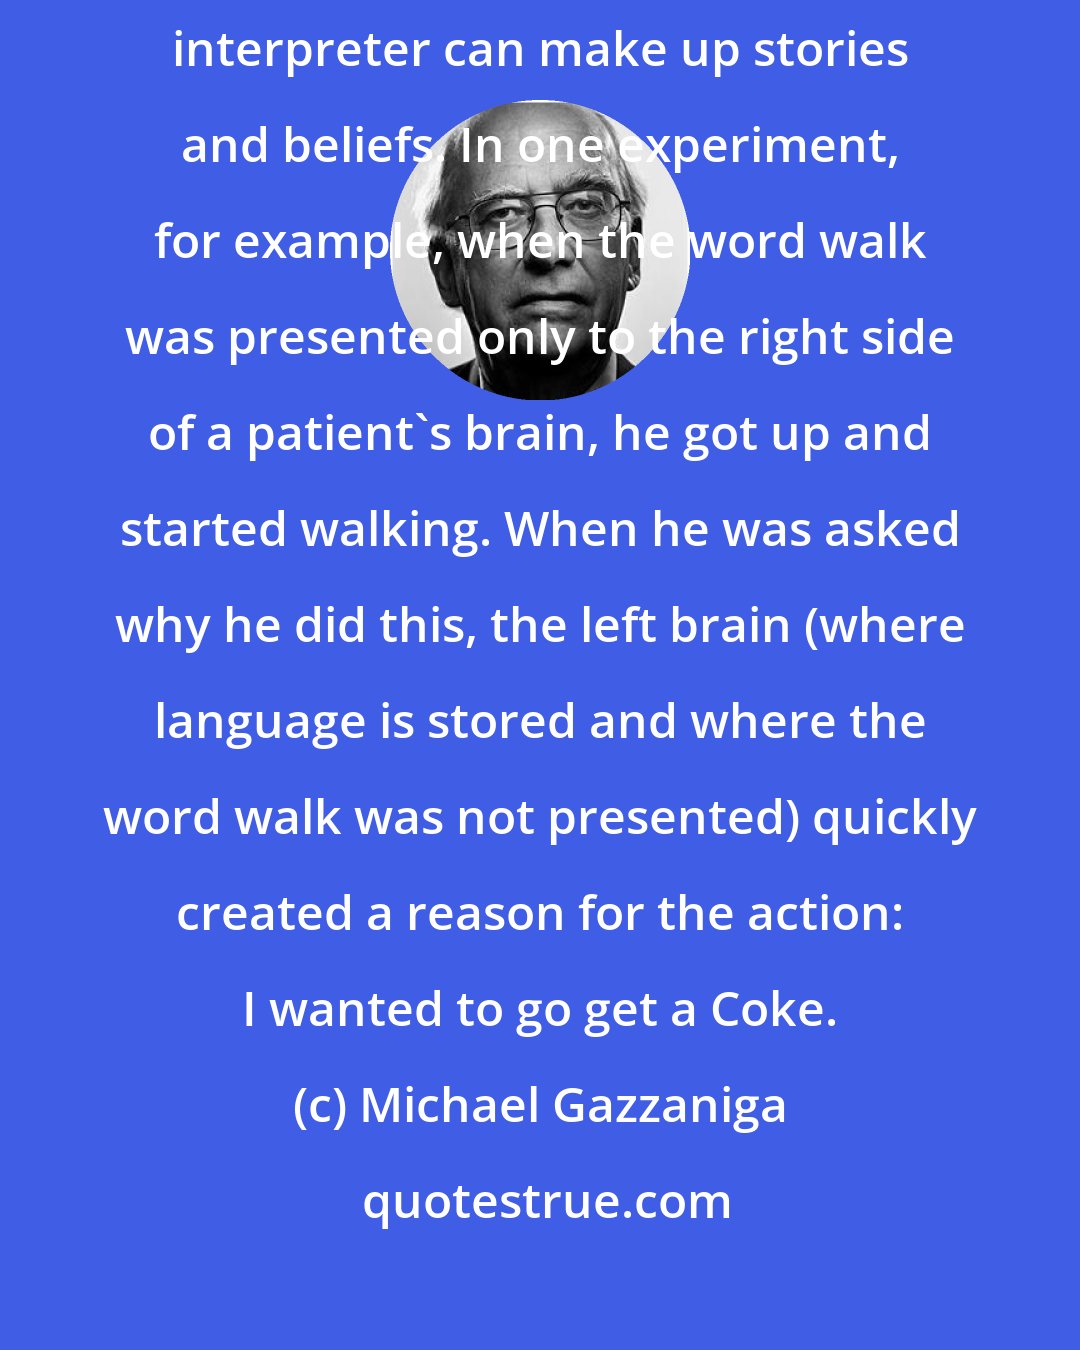 Michael Gazzaniga: Experiments on split-brain patients reveal how readily the left brain interpreter can make up stories and beliefs. In one experiment, for example, when the word walk was presented only to the right side of a patient's brain, he got up and started walking. When he was asked why he did this, the left brain (where language is stored and where the word walk was not presented) quickly created a reason for the action: I wanted to go get a Coke.